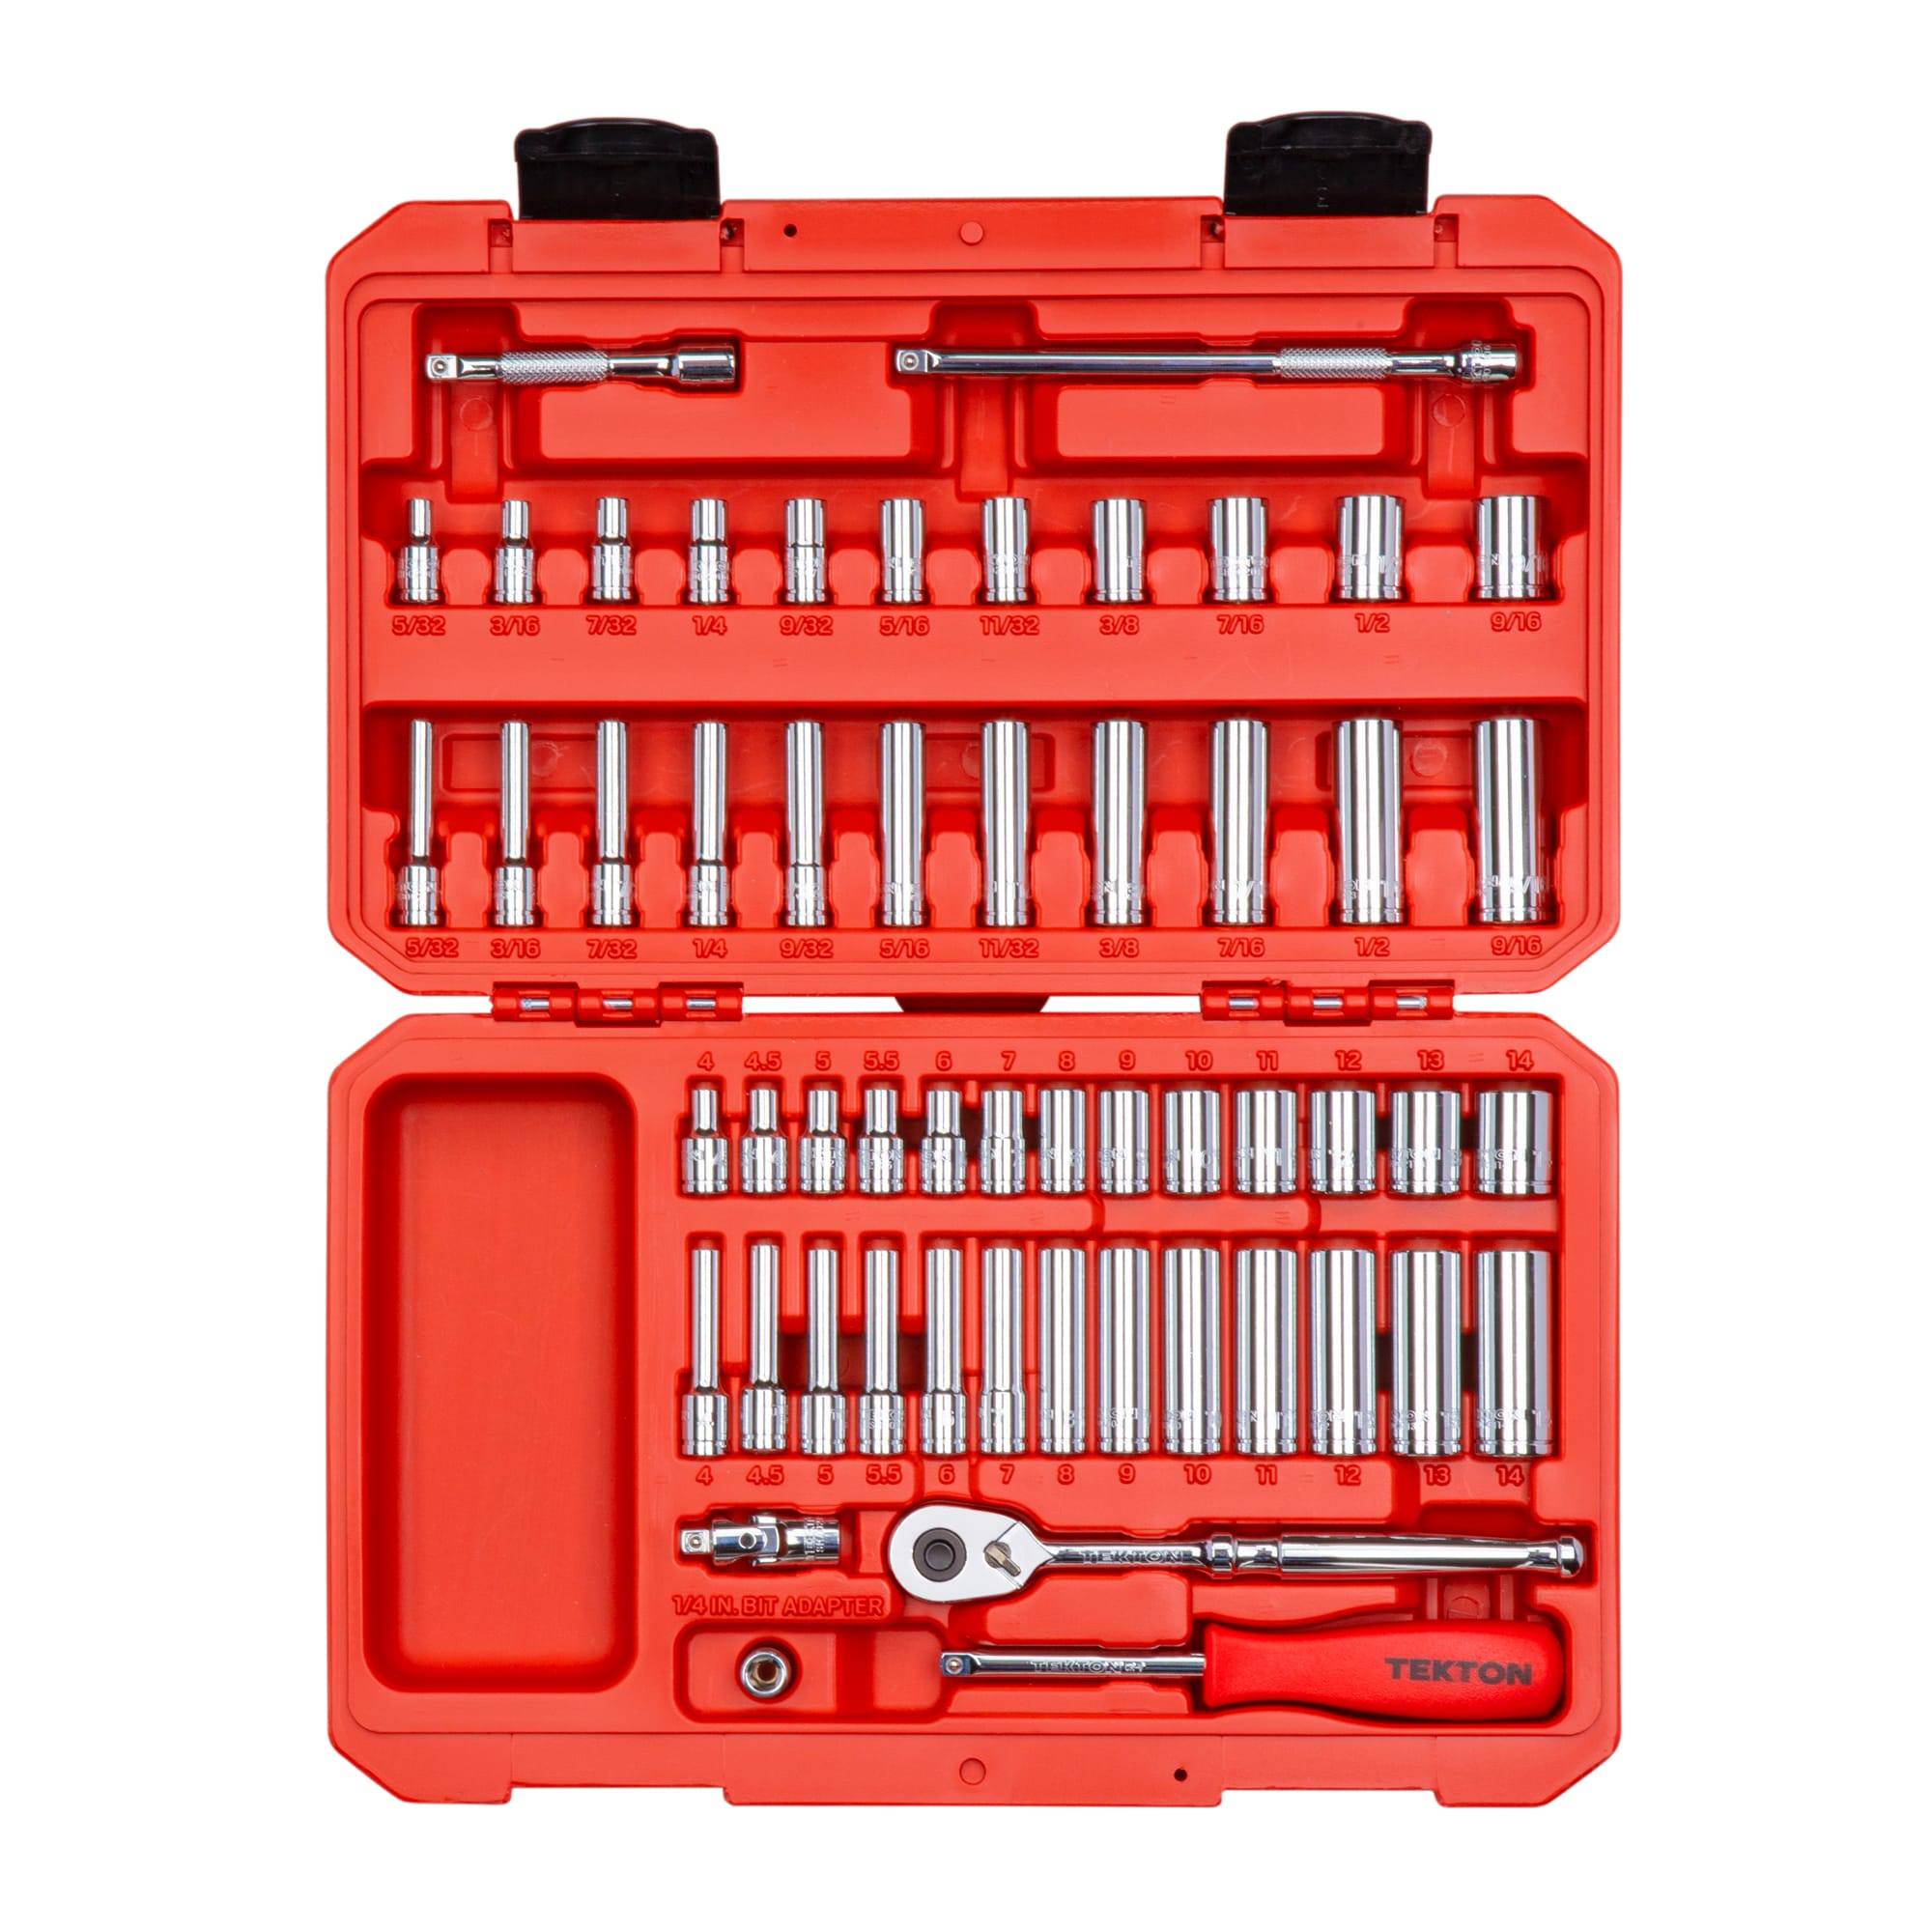 1/4 Inch Drive 6-Point Socket & Ratchet Set, 55-Piece (5/32-9/16 in., 4-14 mm)